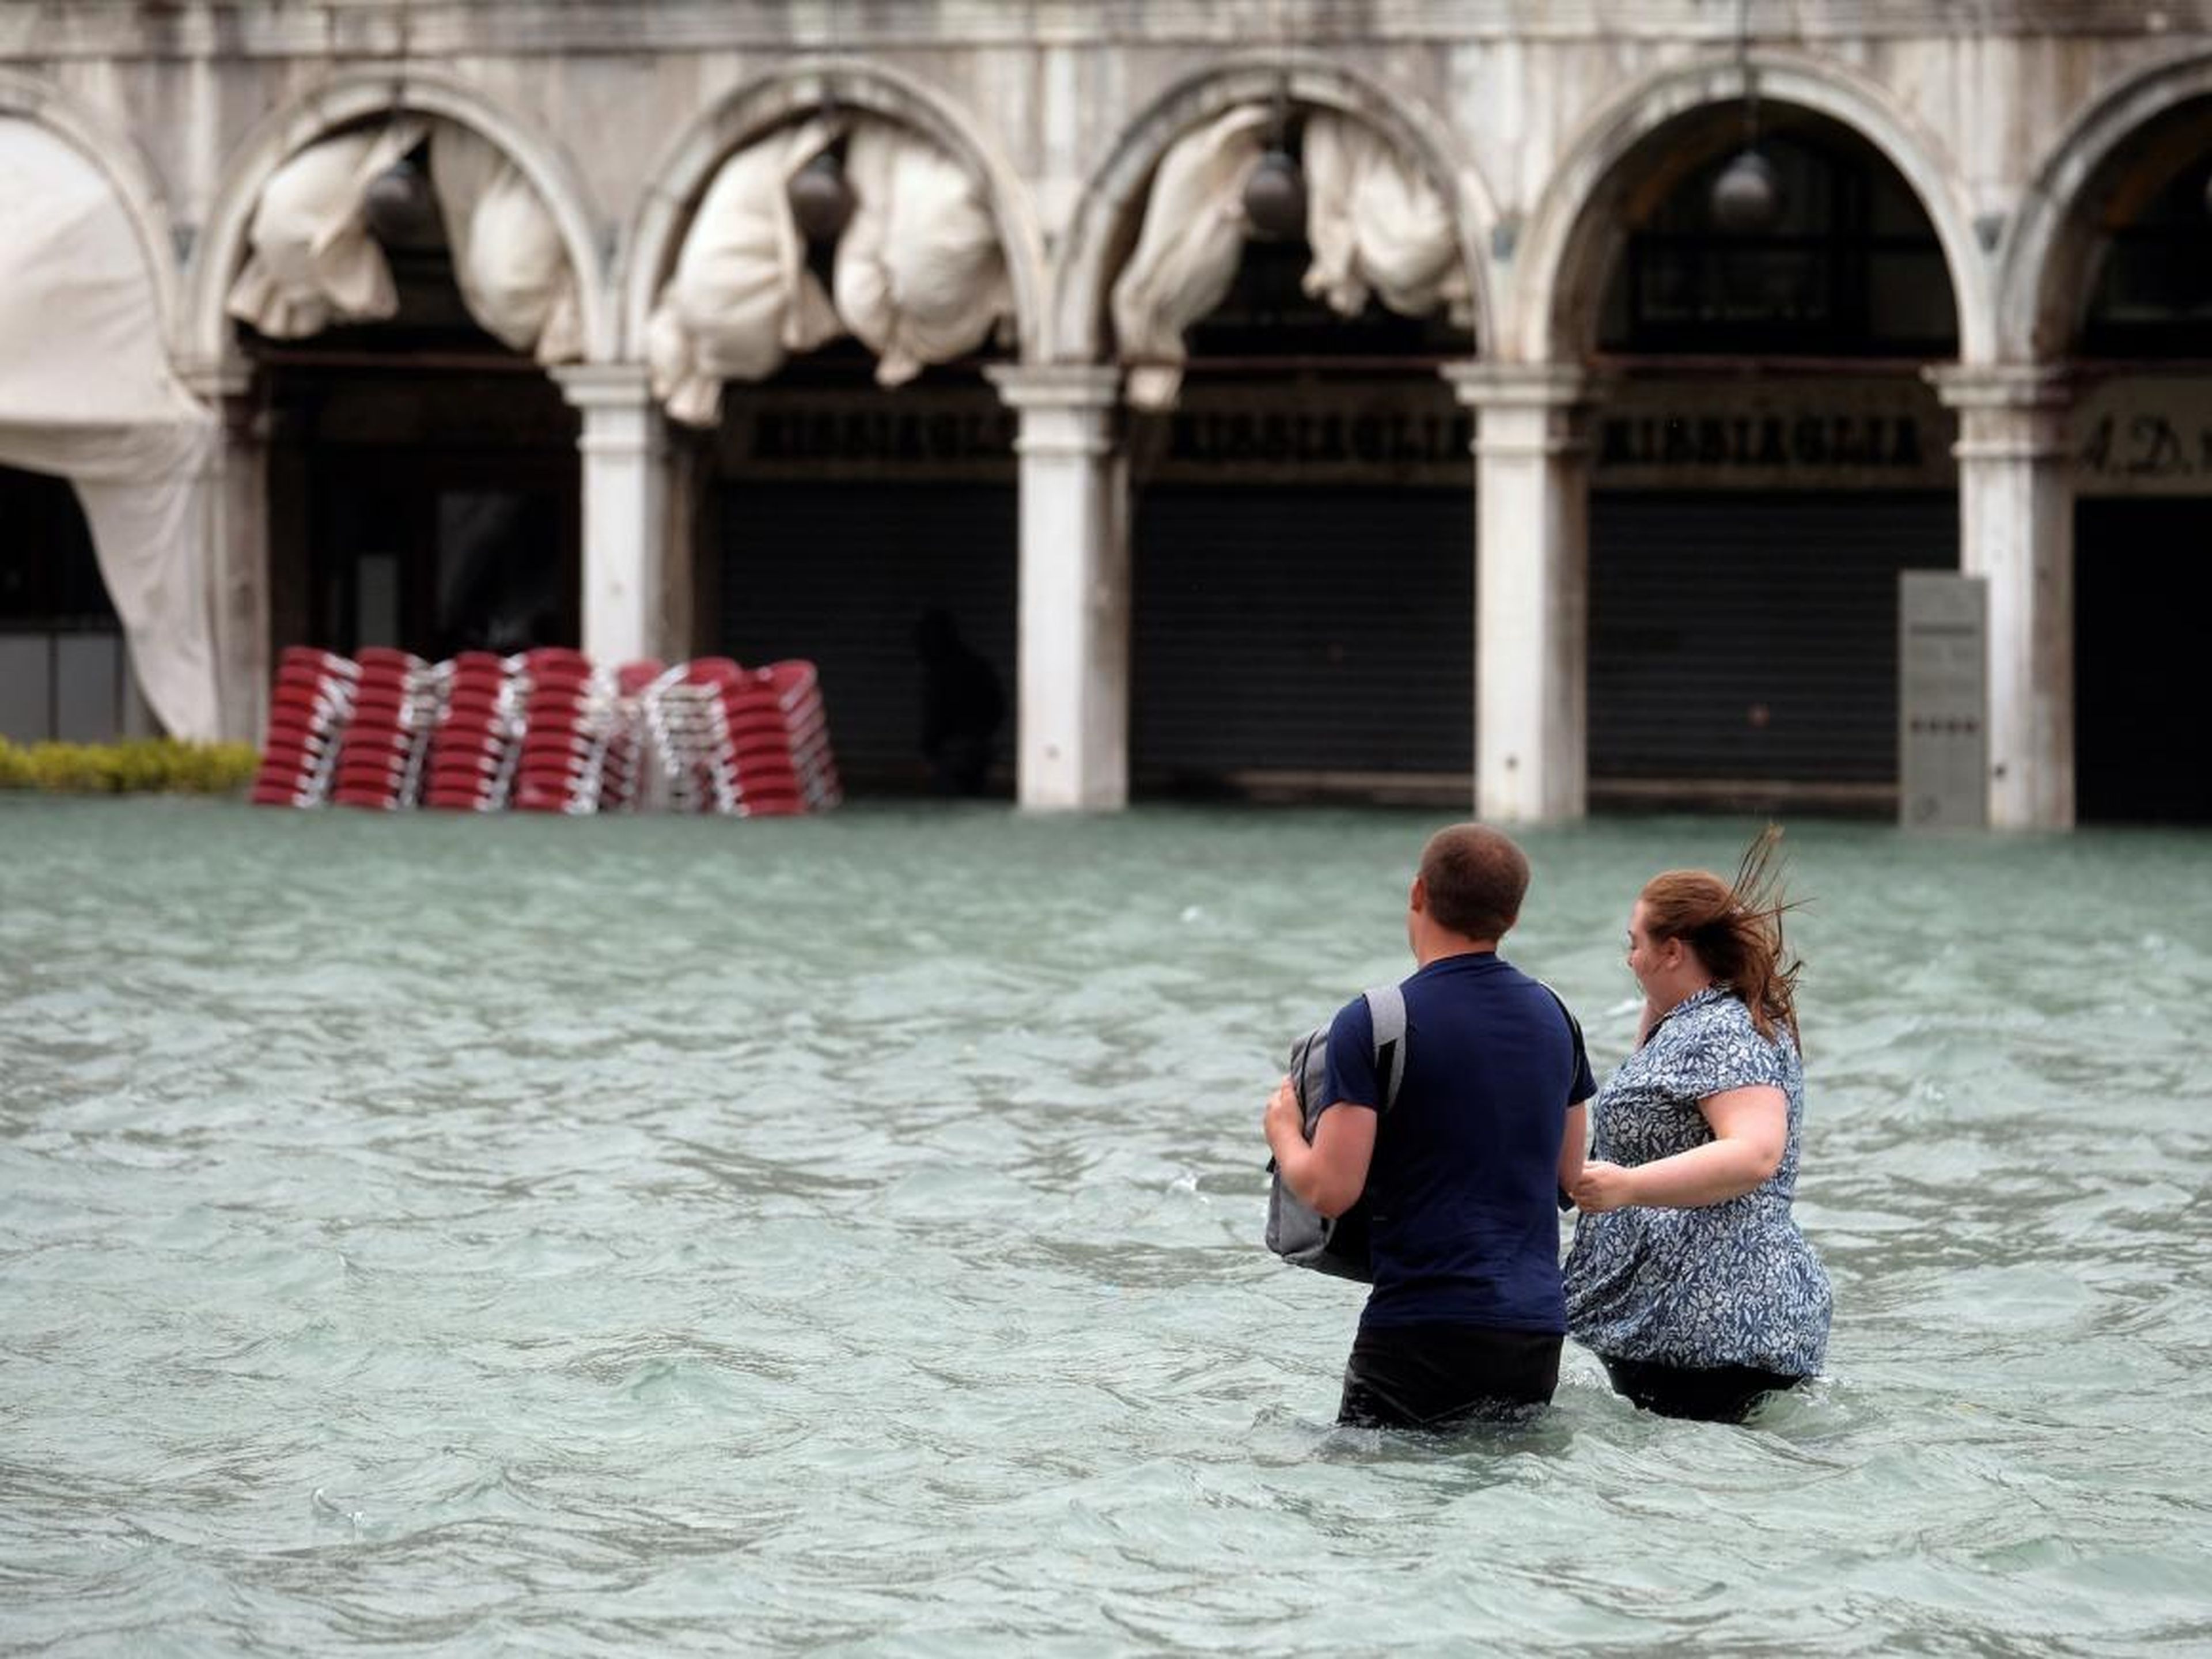 Flooding season, or "acqua alta" — a period of particularly high tides in the Adriatic Sea — runs from autumn to spring in Venice.